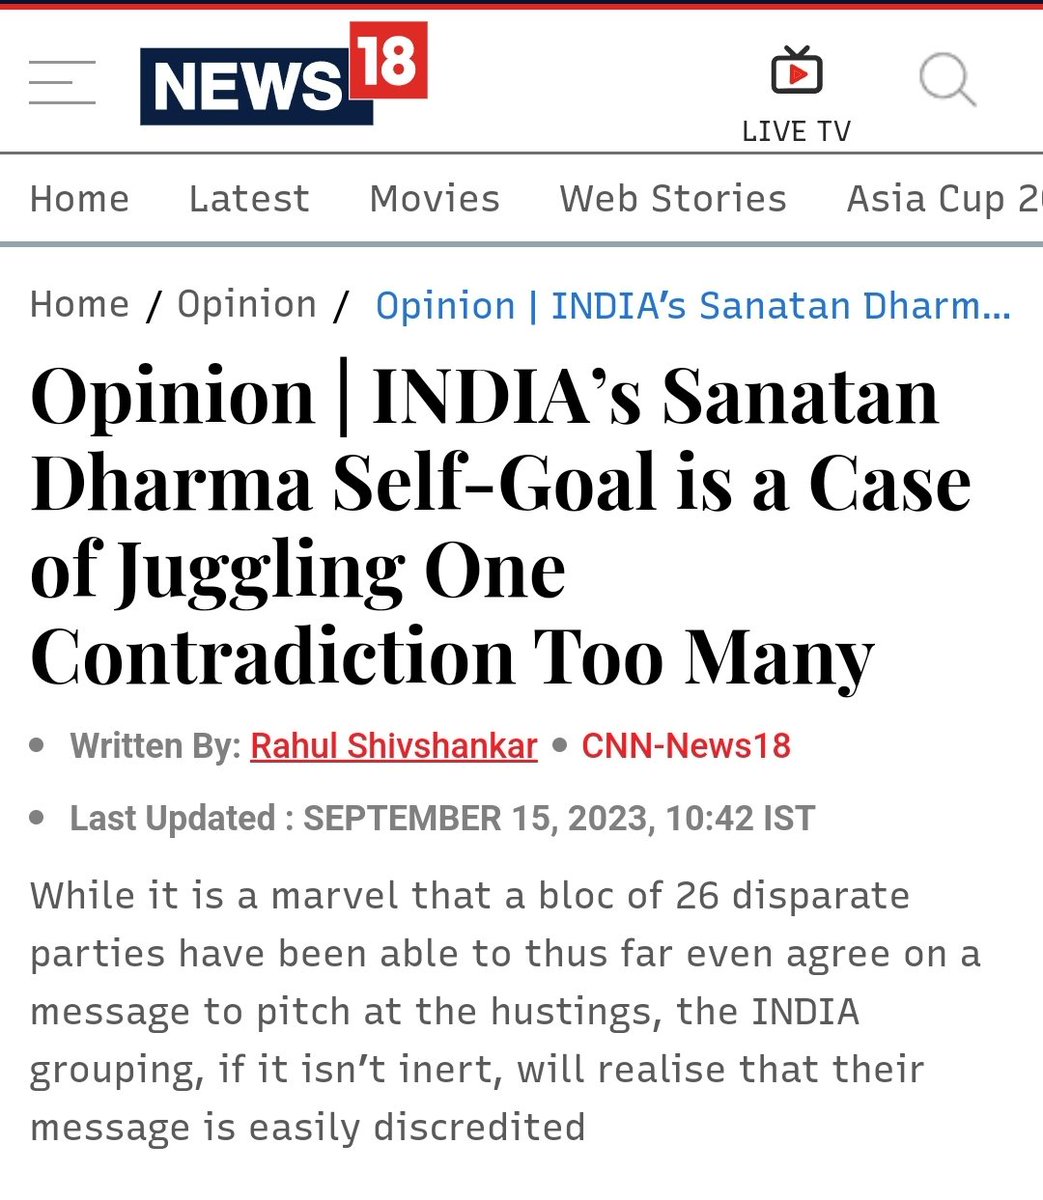 The Sanatan Dharma self-goal shows INDIA needs to pivot to champion more public-centric causes. Who in an election year, after all, wants to be accused by voters of changing their principles for the sake of their party? Click to read my latest piece: news18.com/opinion/opinio…